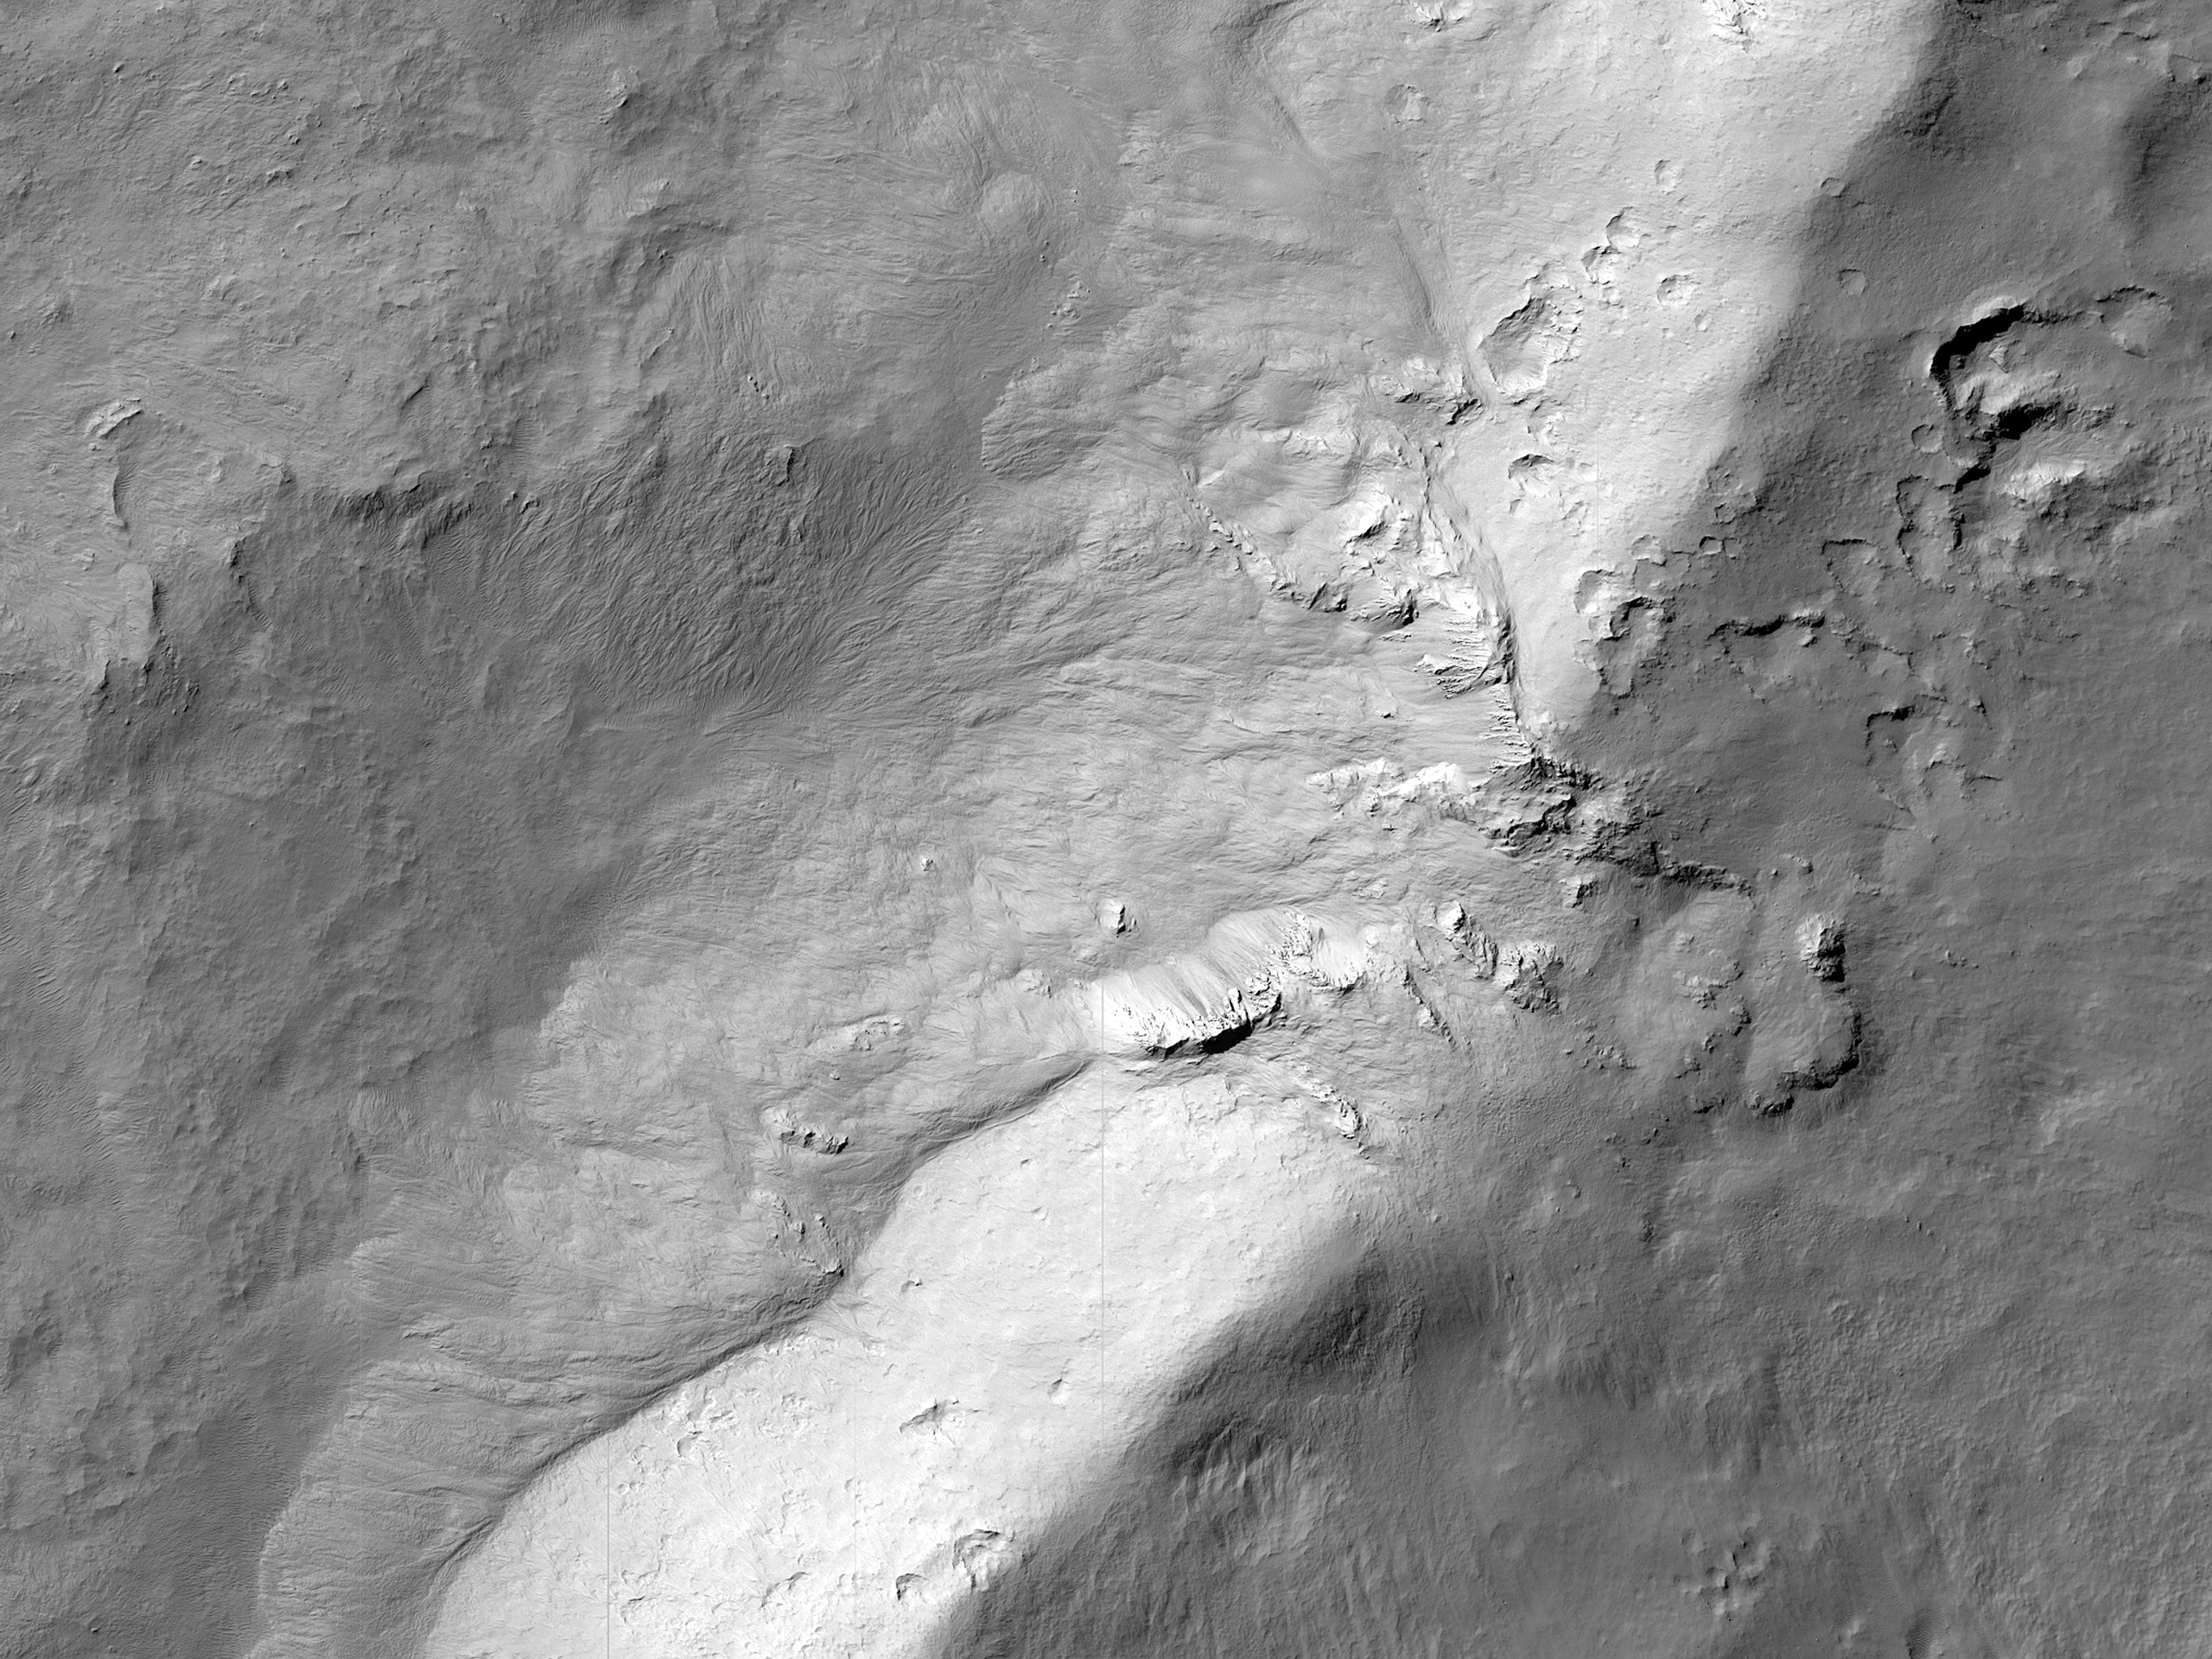 Flow Features inside Eastern Floor of Crater South of Burton Crater